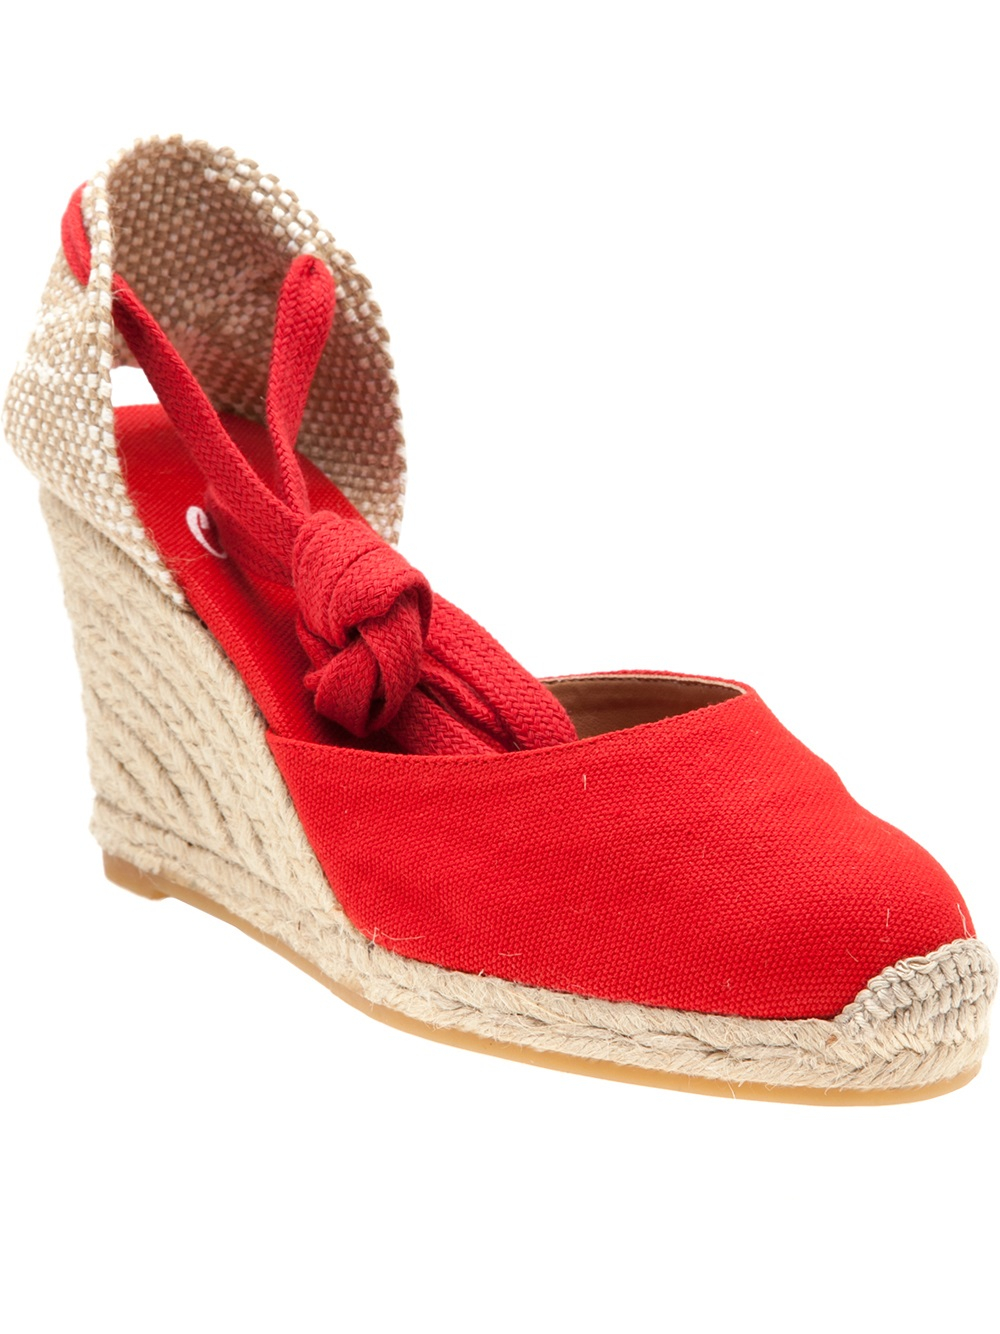 Castaner Carina Wedge Sandal in Red | Lyst